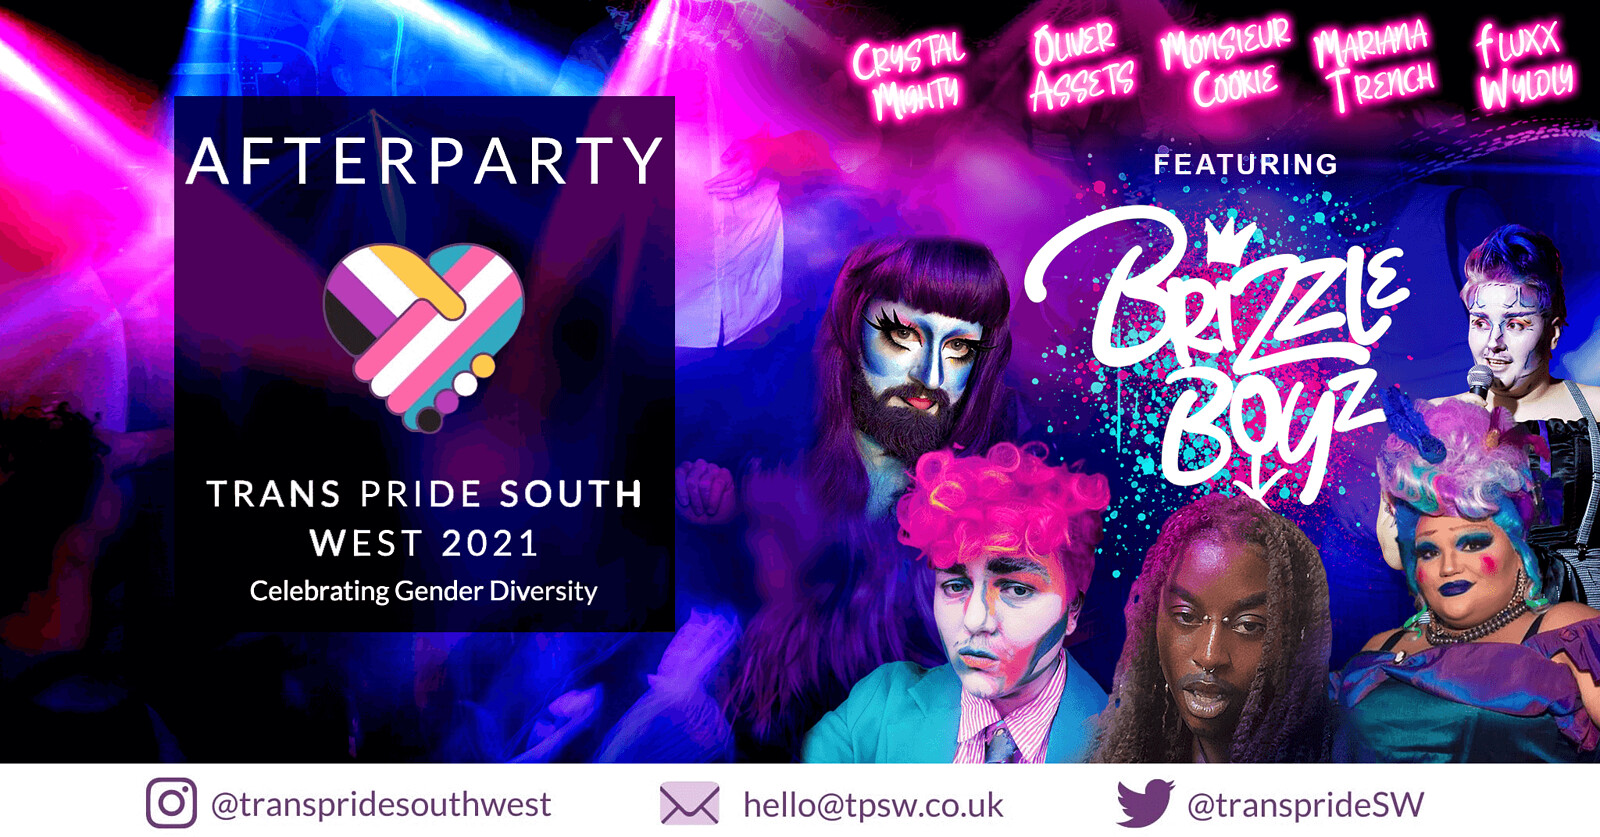 Trans Pride South West Afterparty ft. Brizzle Boyz at The Station